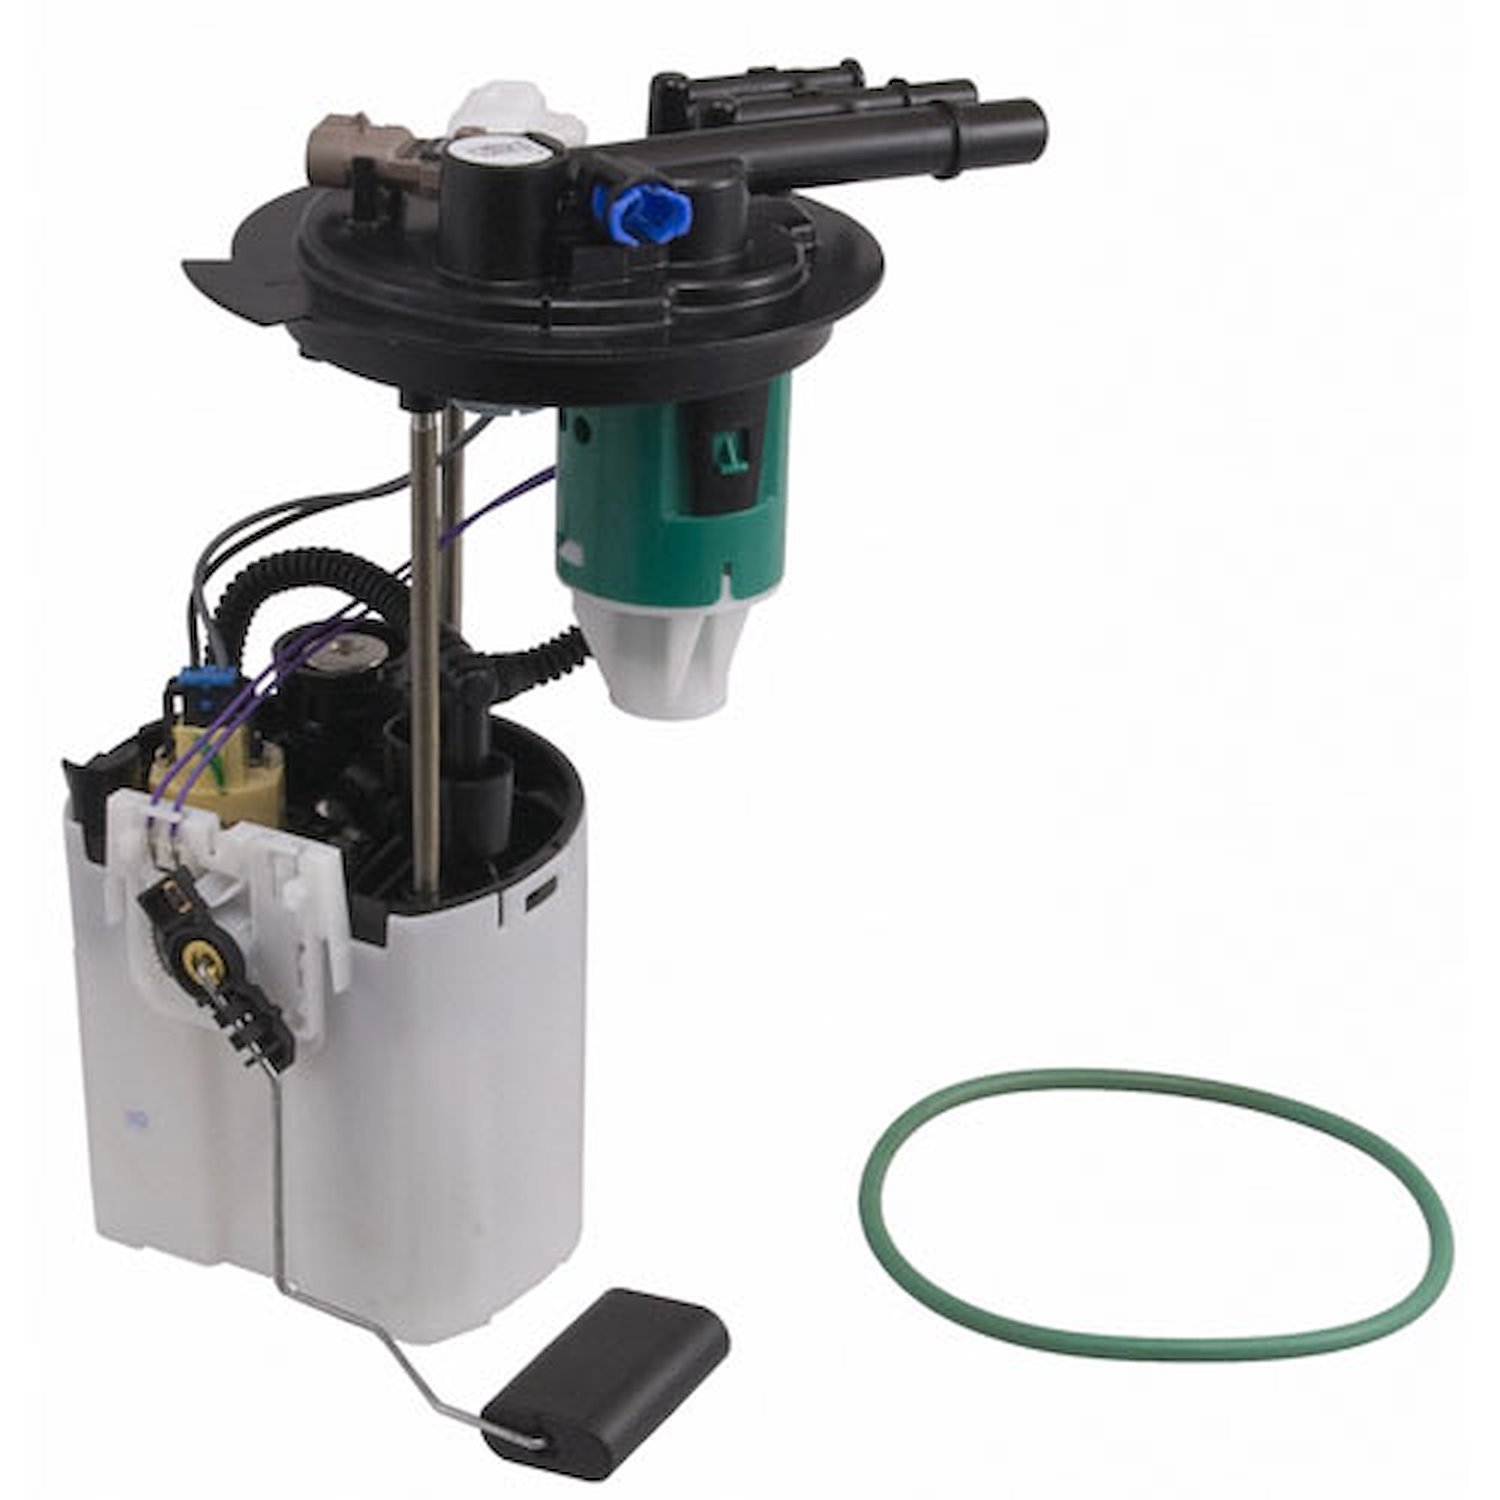 OE GM Replacement Electric Fuel Pump Module Assembly 2006 Chevrolet Impala/Monte Carlo 3.5L V6